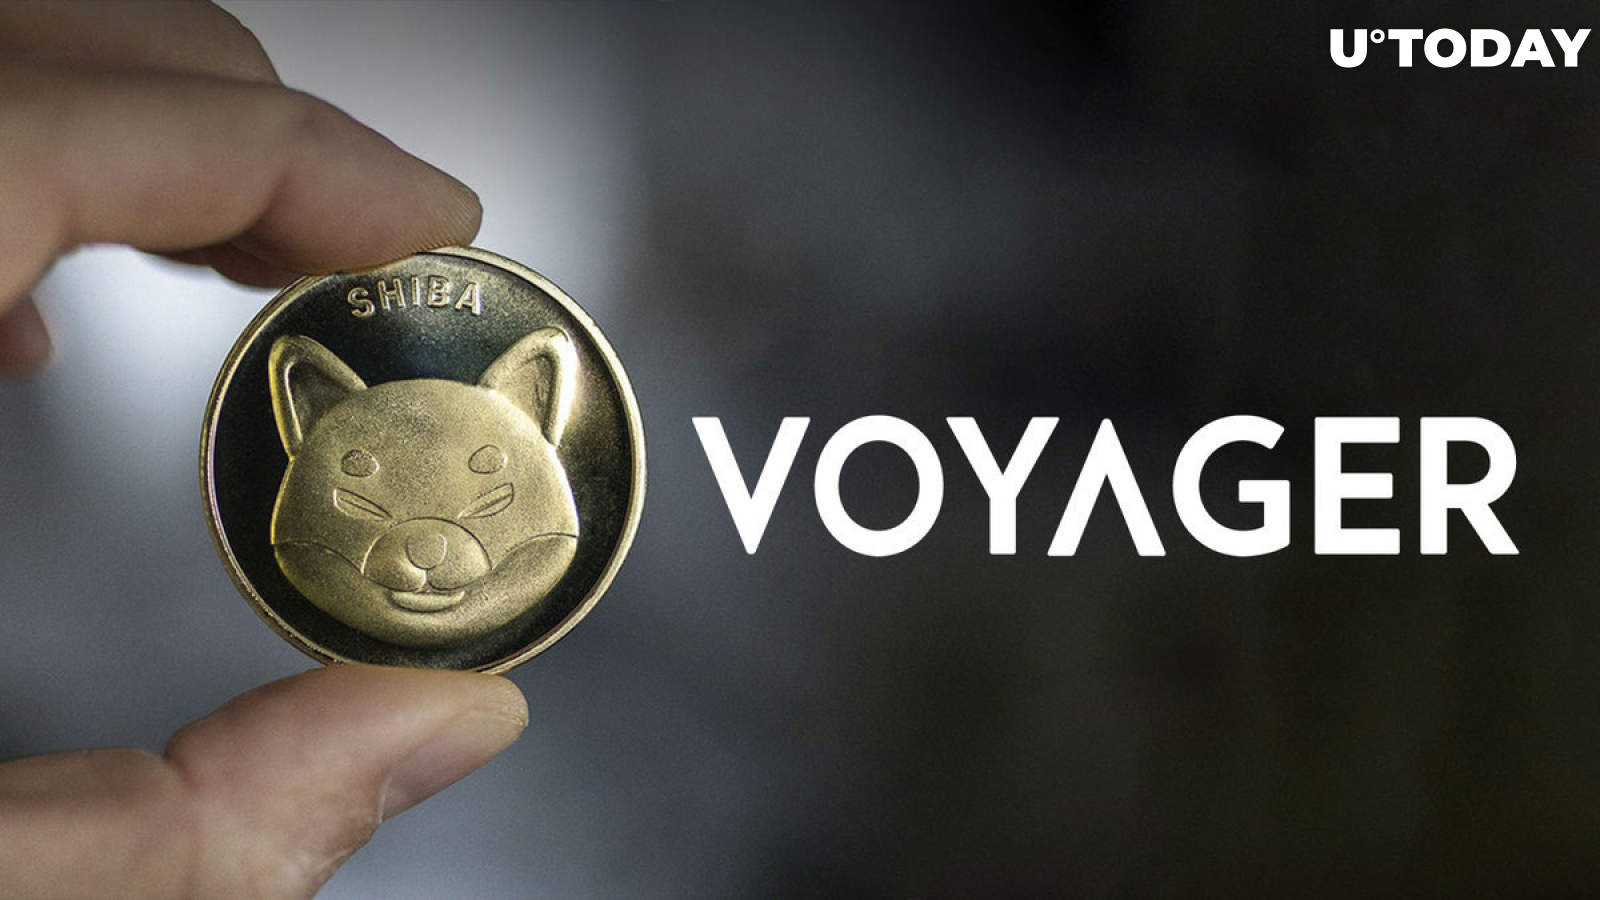 Voyager Gets $610 Million from Selling Shiba Inu, ETH and VGX